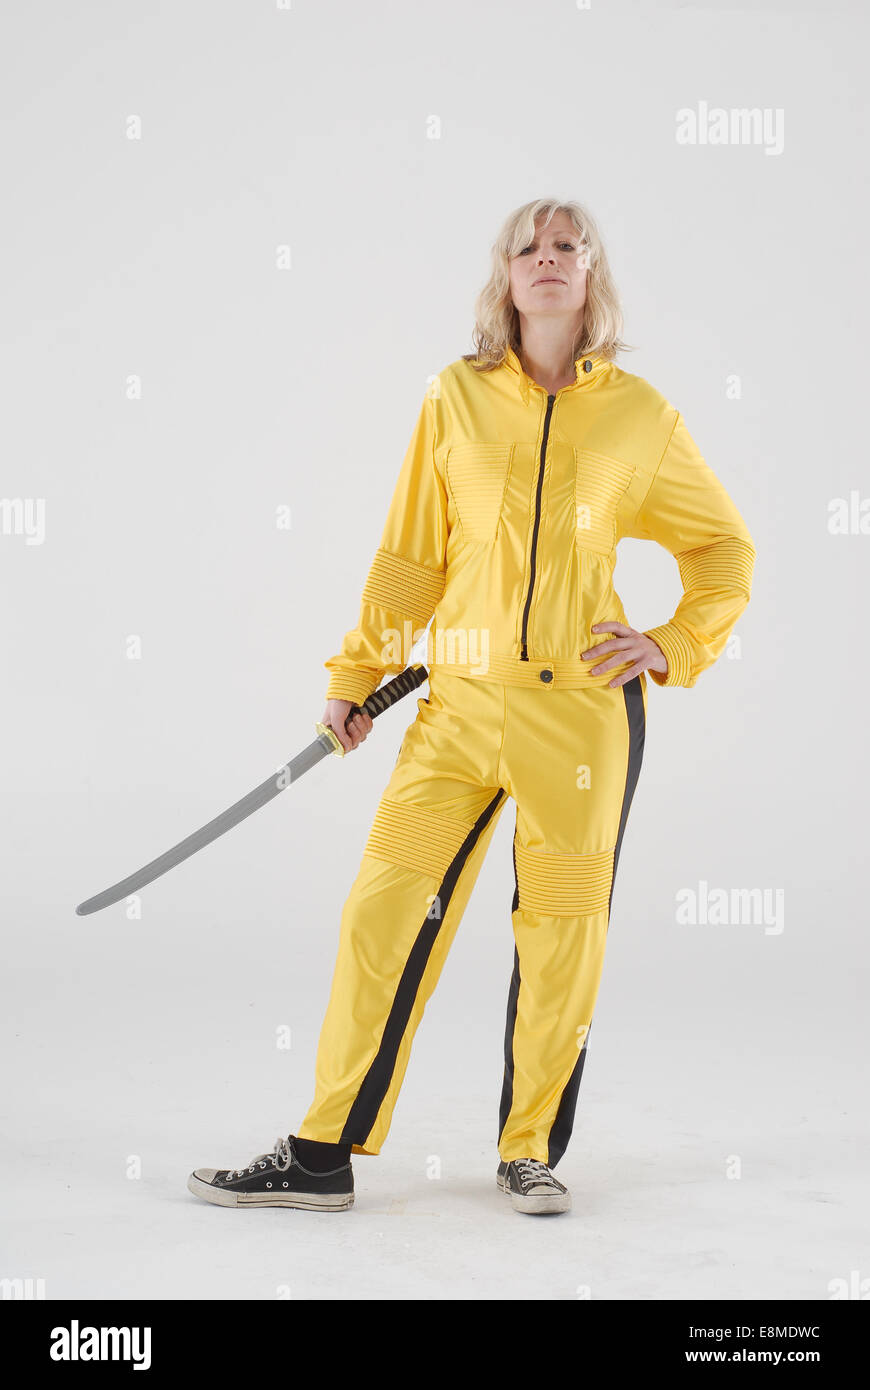 Woman in fancy dress comedy costume as The Bride from Kill Bill Movie by Tarantino with yellow jump suit / outfit, samurai sword Stock Photo